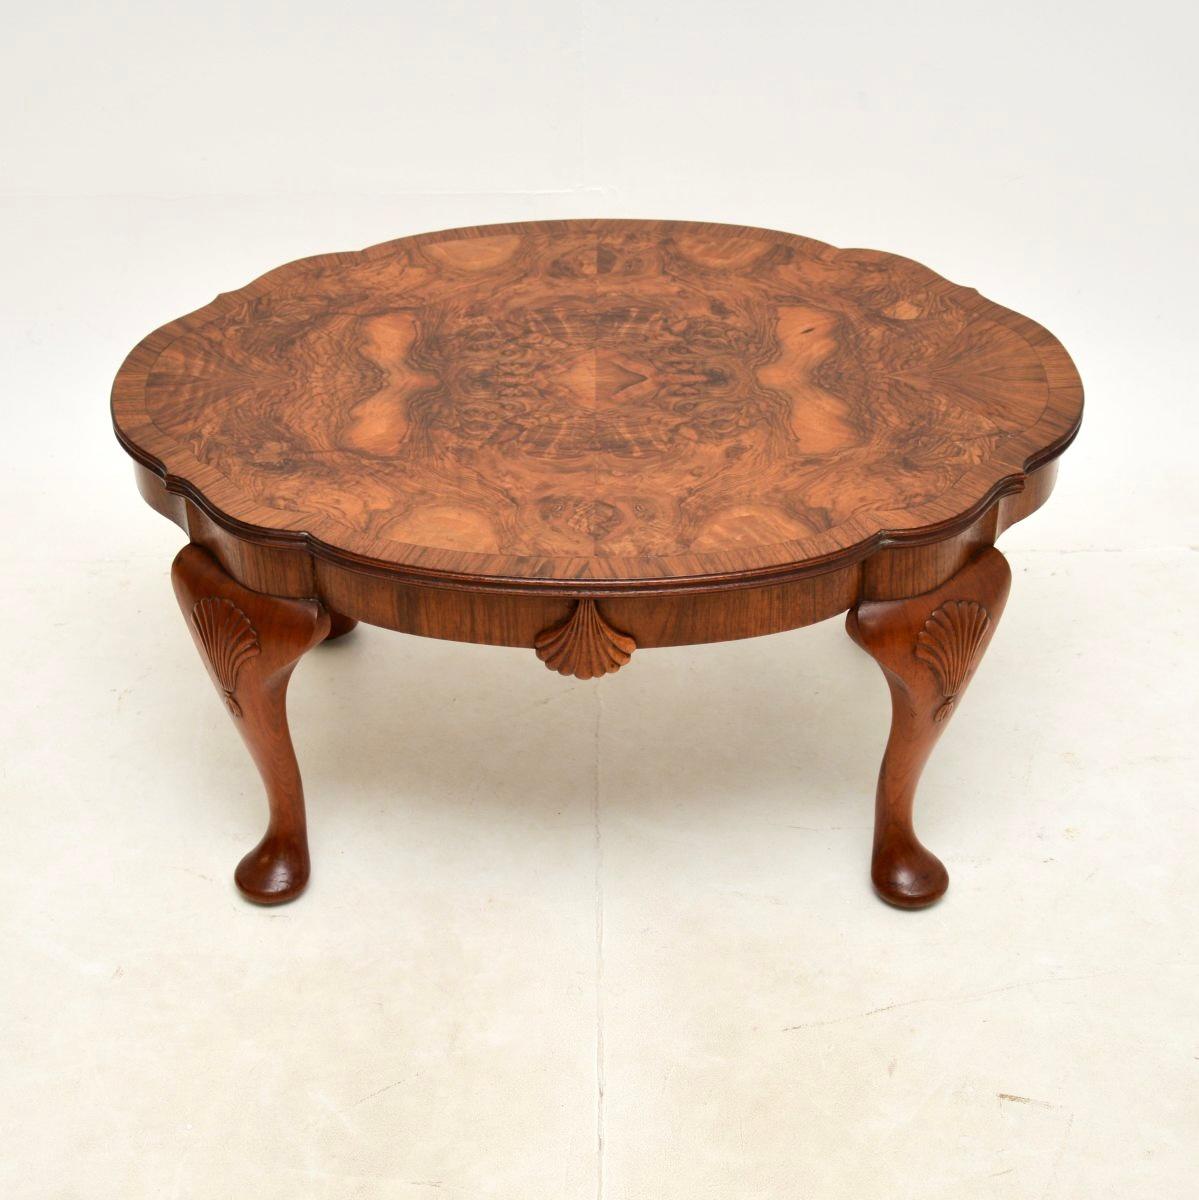 A fantastic antique burr walnut coffee table. This was made in England, it dates from around the 1900-1920 period.

The quality is superb, this has a beautifully shaped top with cross banded edges and stunning burr walnut grain patterns. It sits on